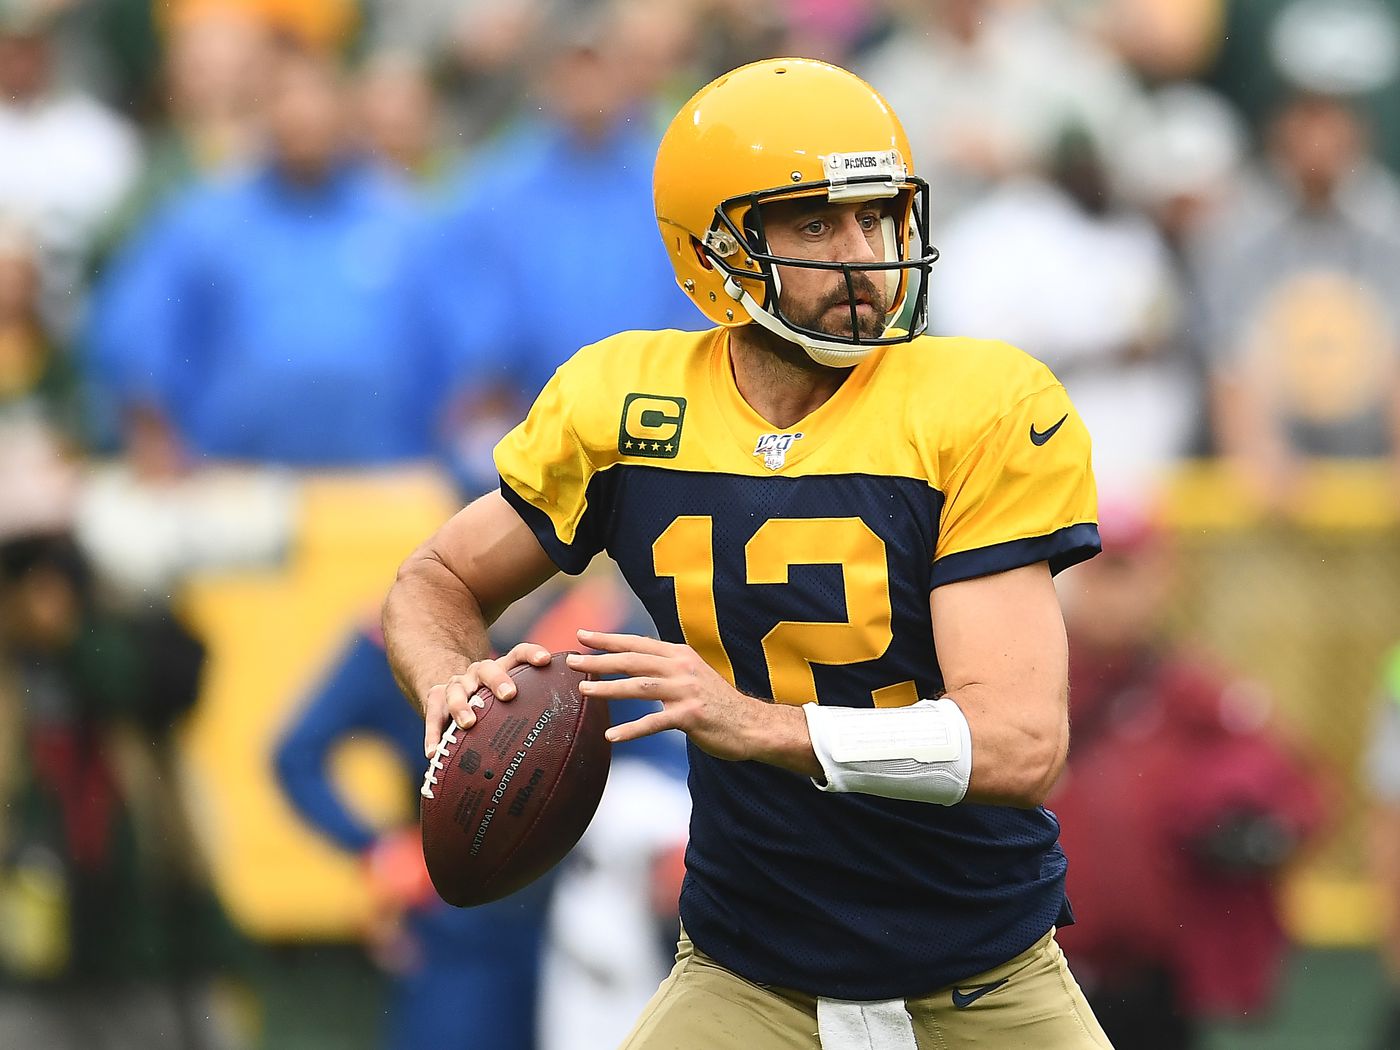 Packers will wait until 2021 for new throwback jersey, says Pro